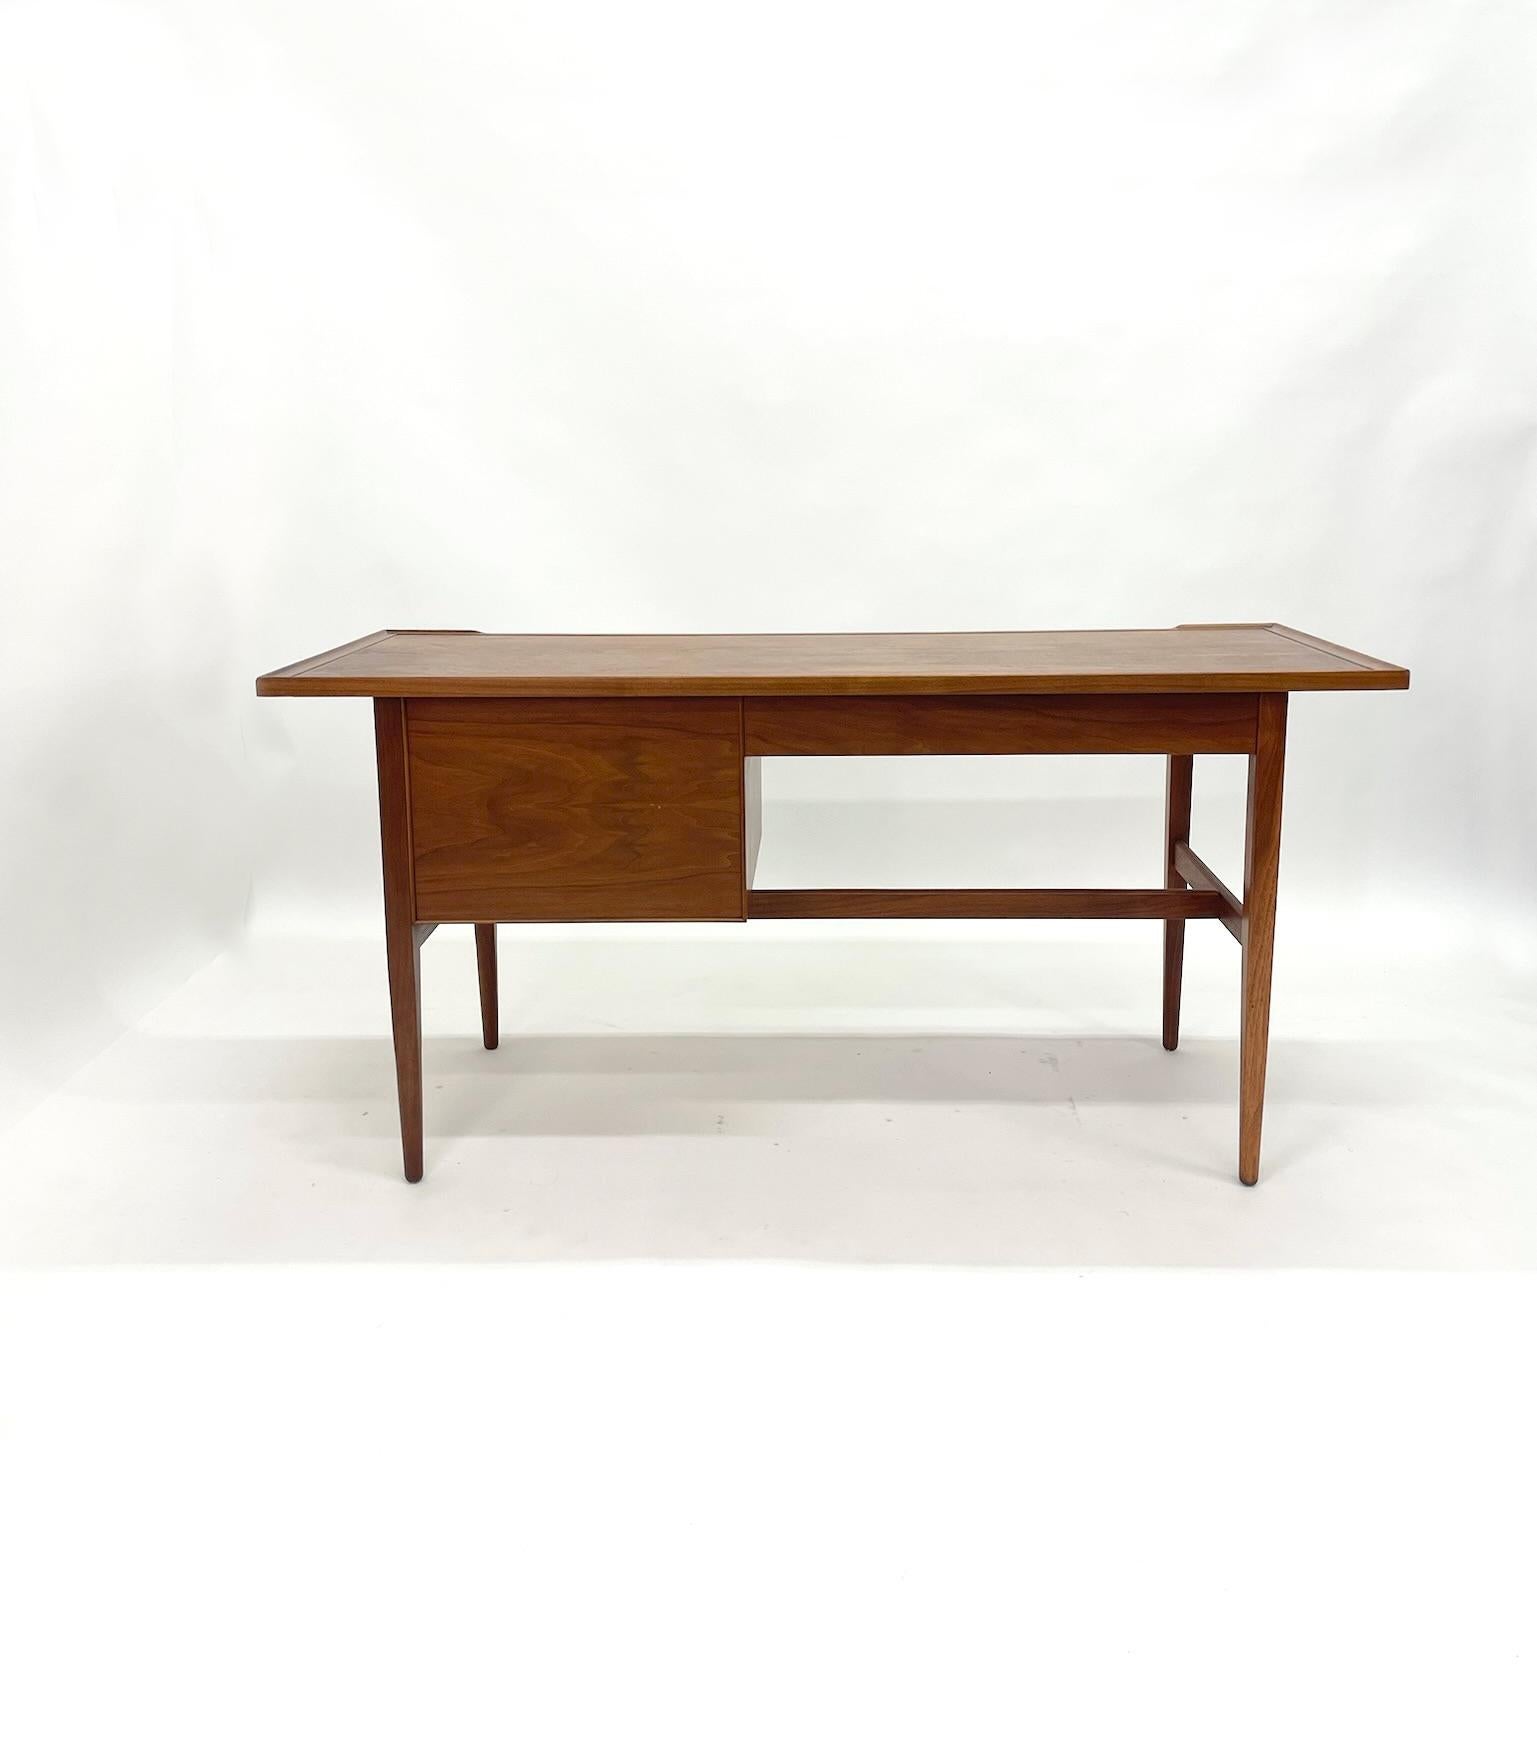 Designed by Kipp Stewart for Drexel with simple and sophisticated modern lines. Large file drawer and wide desk drawer, tapered legs, warm walnut grain. Stewart's design adds a nice sculpted lip around the edge. Finished on all sides. Completely